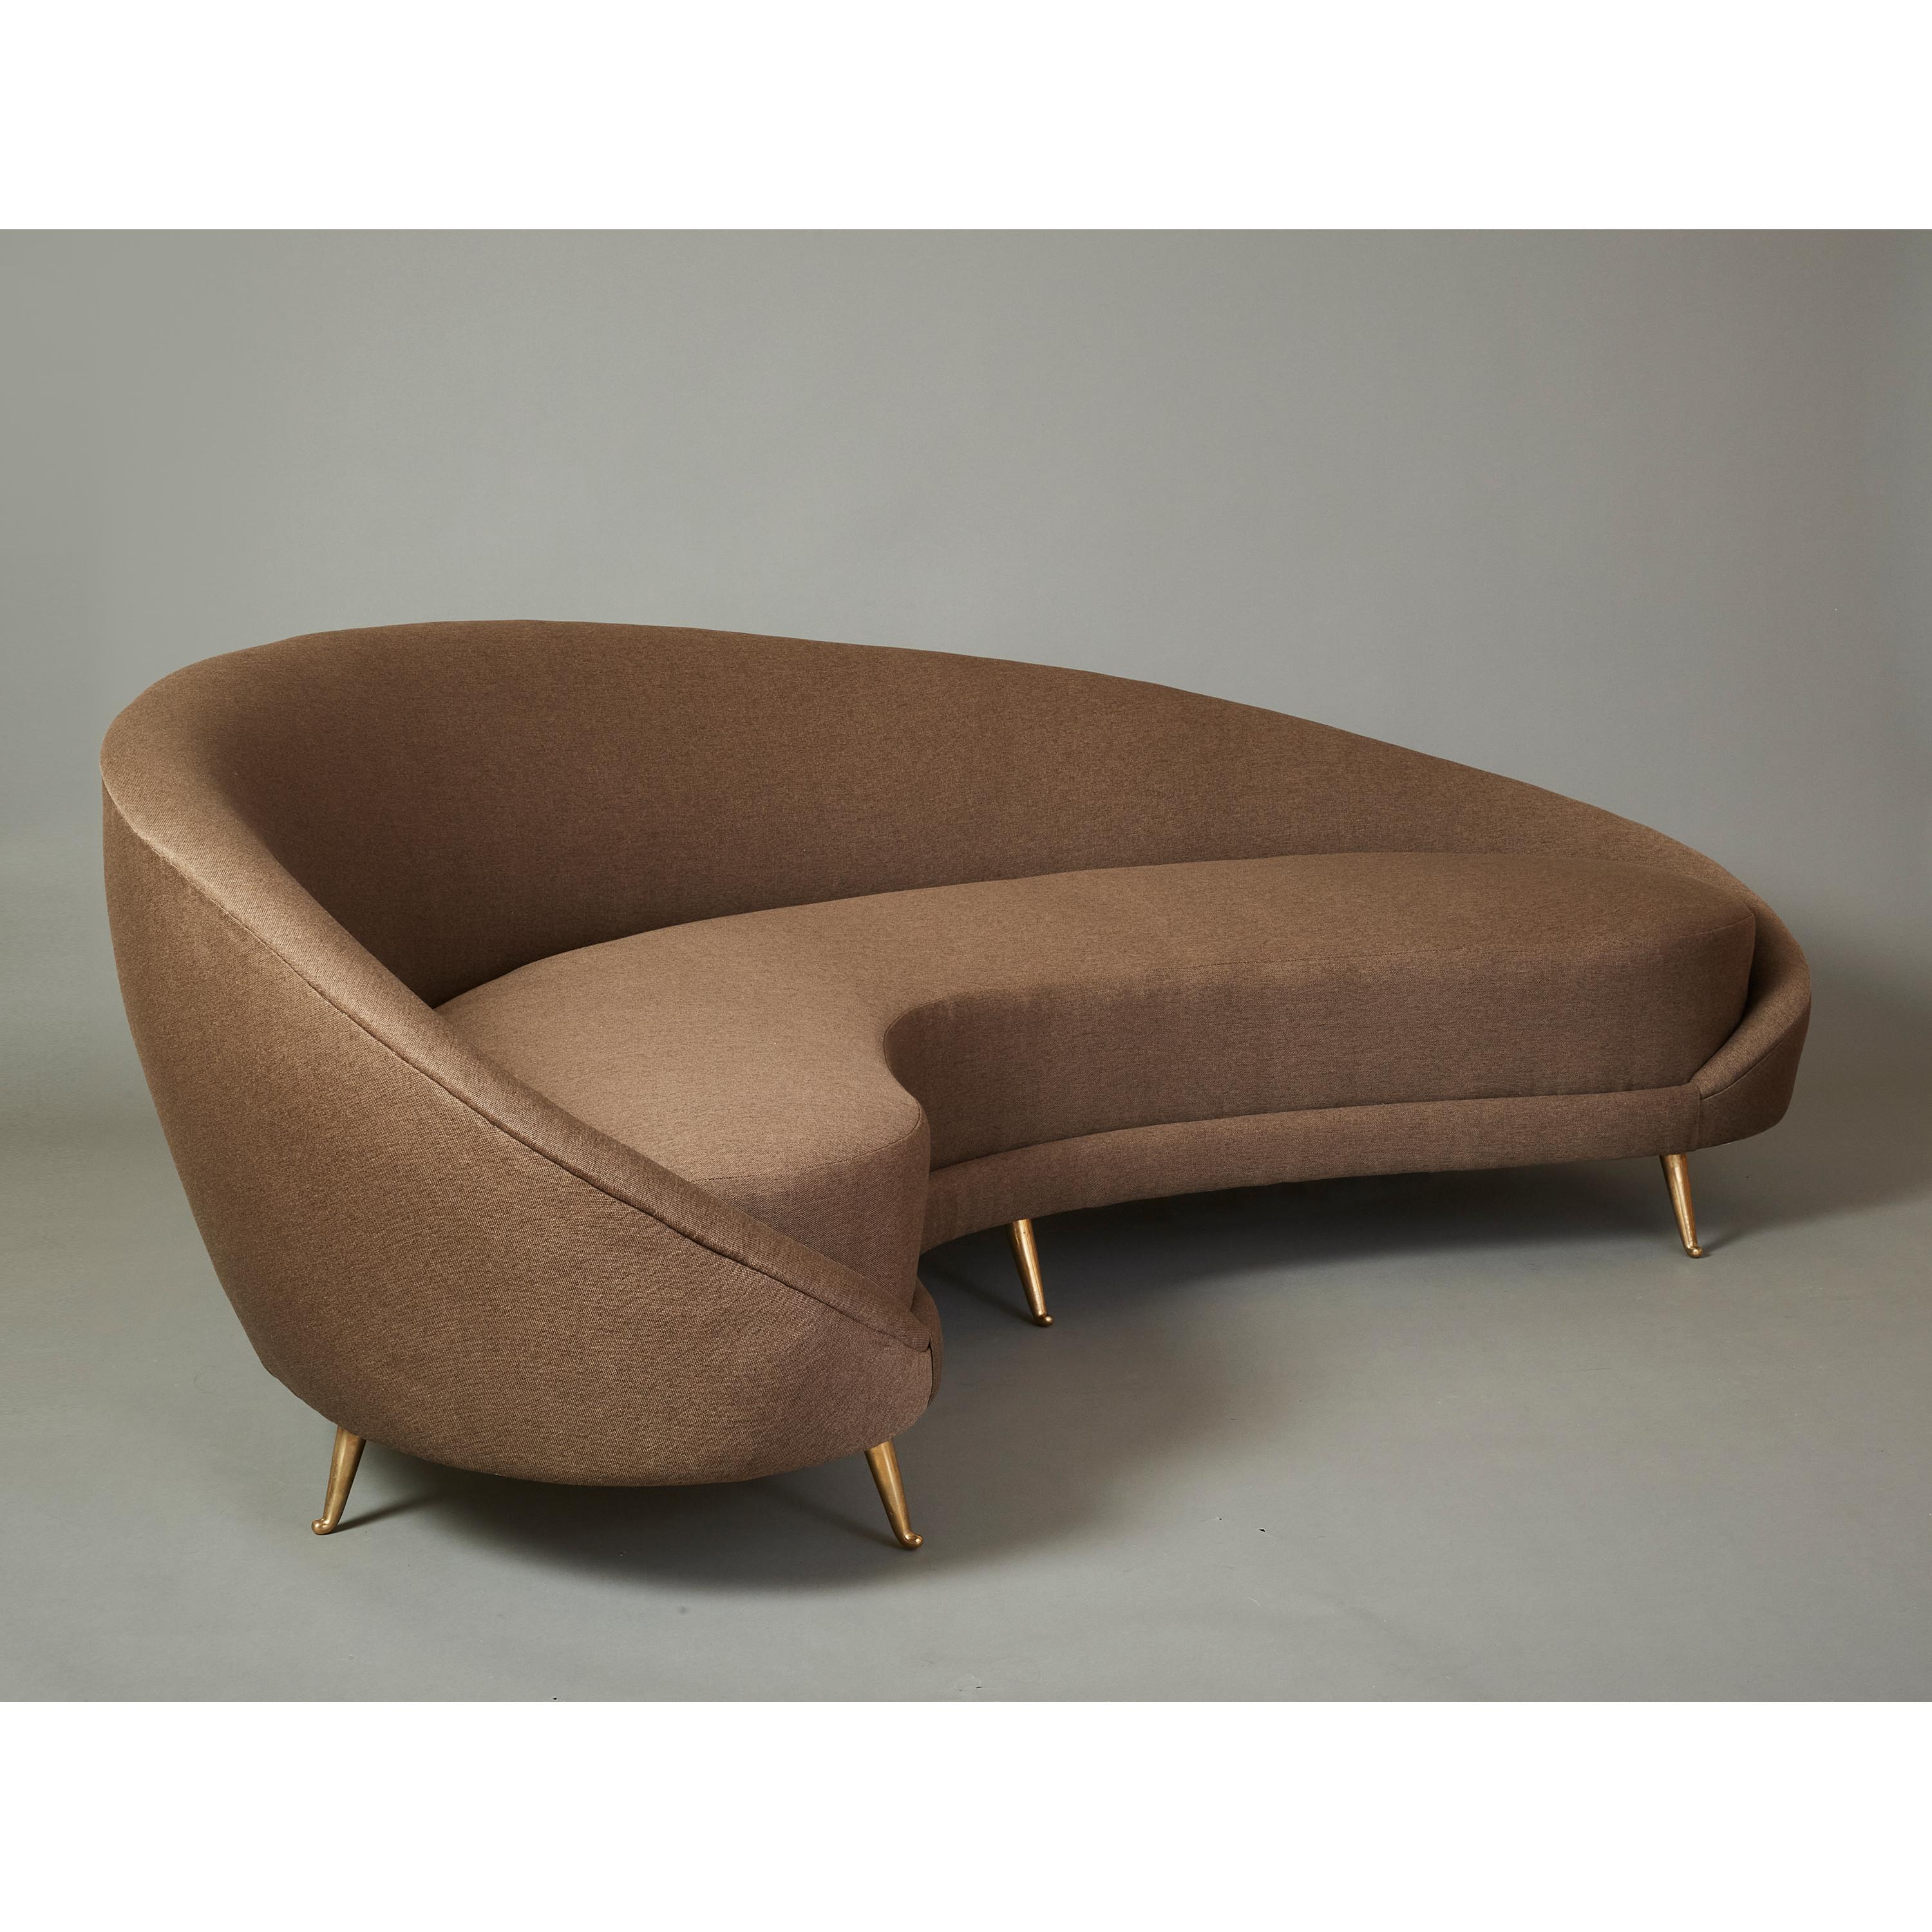 Mid-Century Modern Federico Munari Curved Boomerang Sofa with Polished Brass Legs, Italy 1950's For Sale